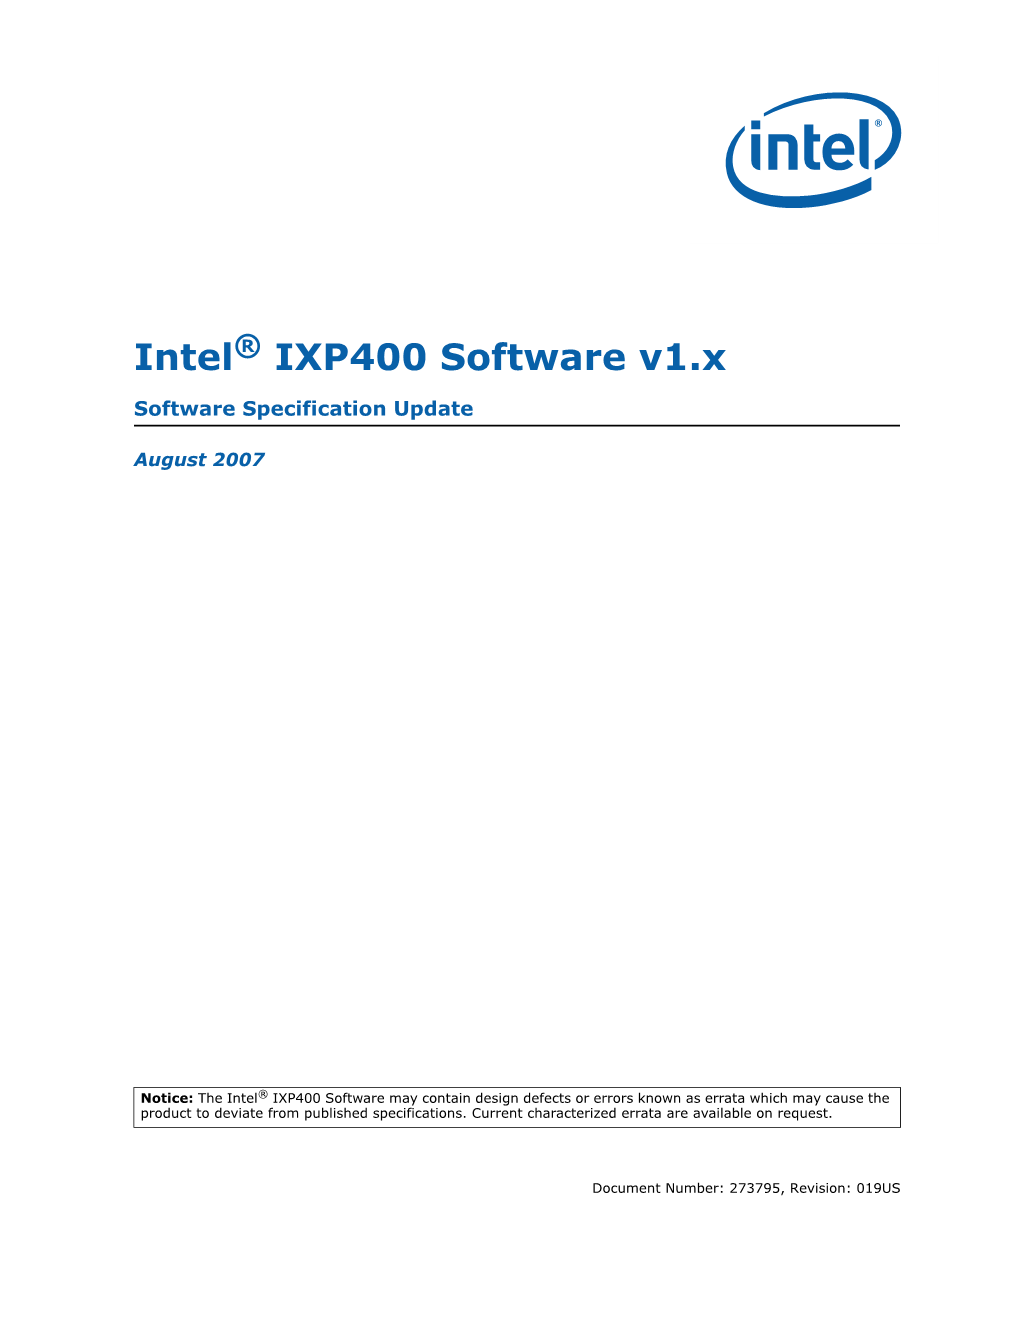 Intel® IXP400 Software V1.X Software Specification Update